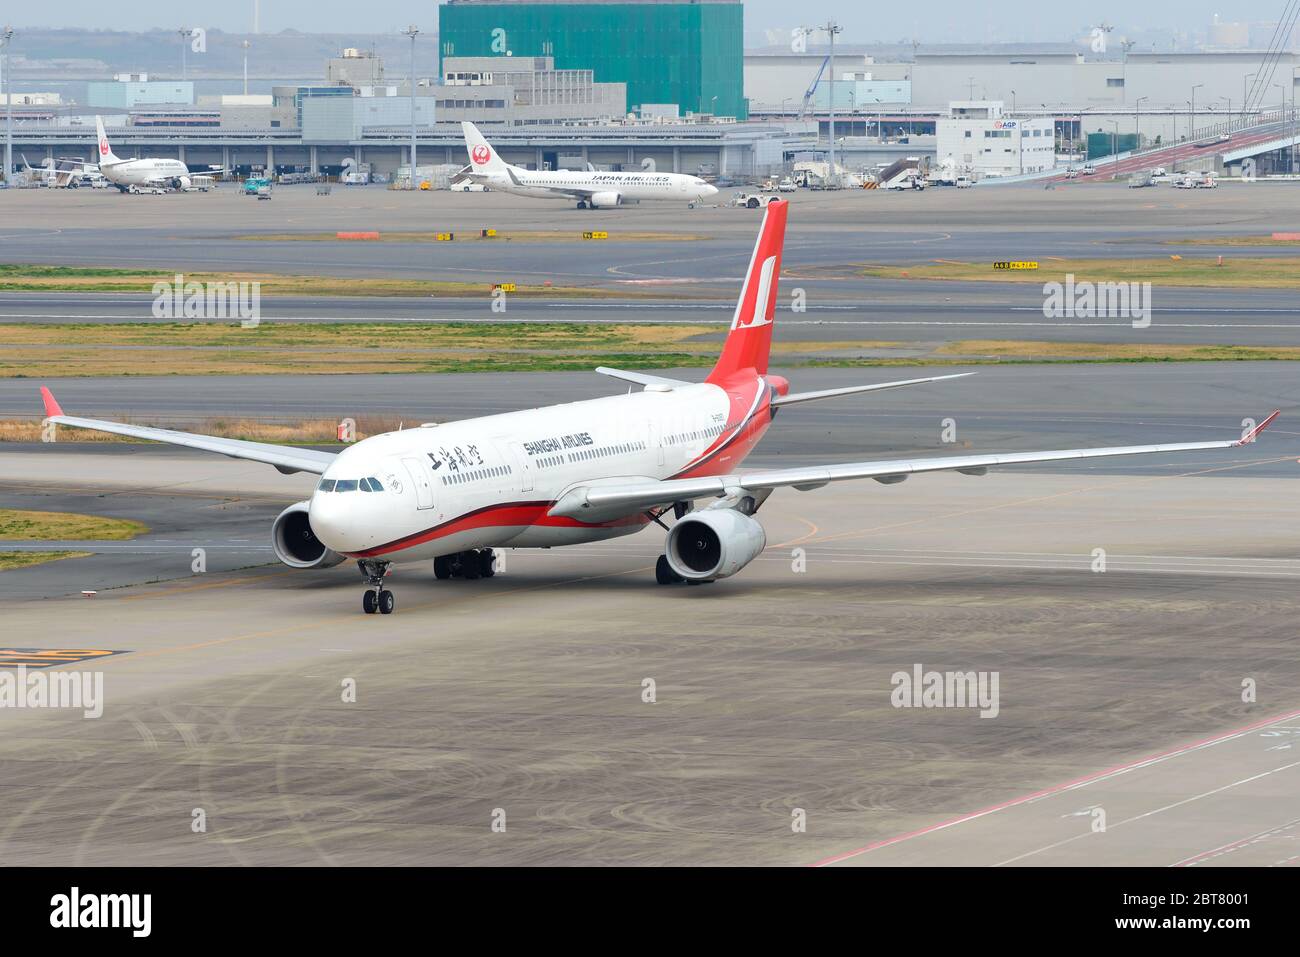 Shanghai Airlines jet Airbus A330 B-6097 inbound from Pudong Airport in China. Aircraft wingspan. Shangai Airlines airplane. Stock Photo